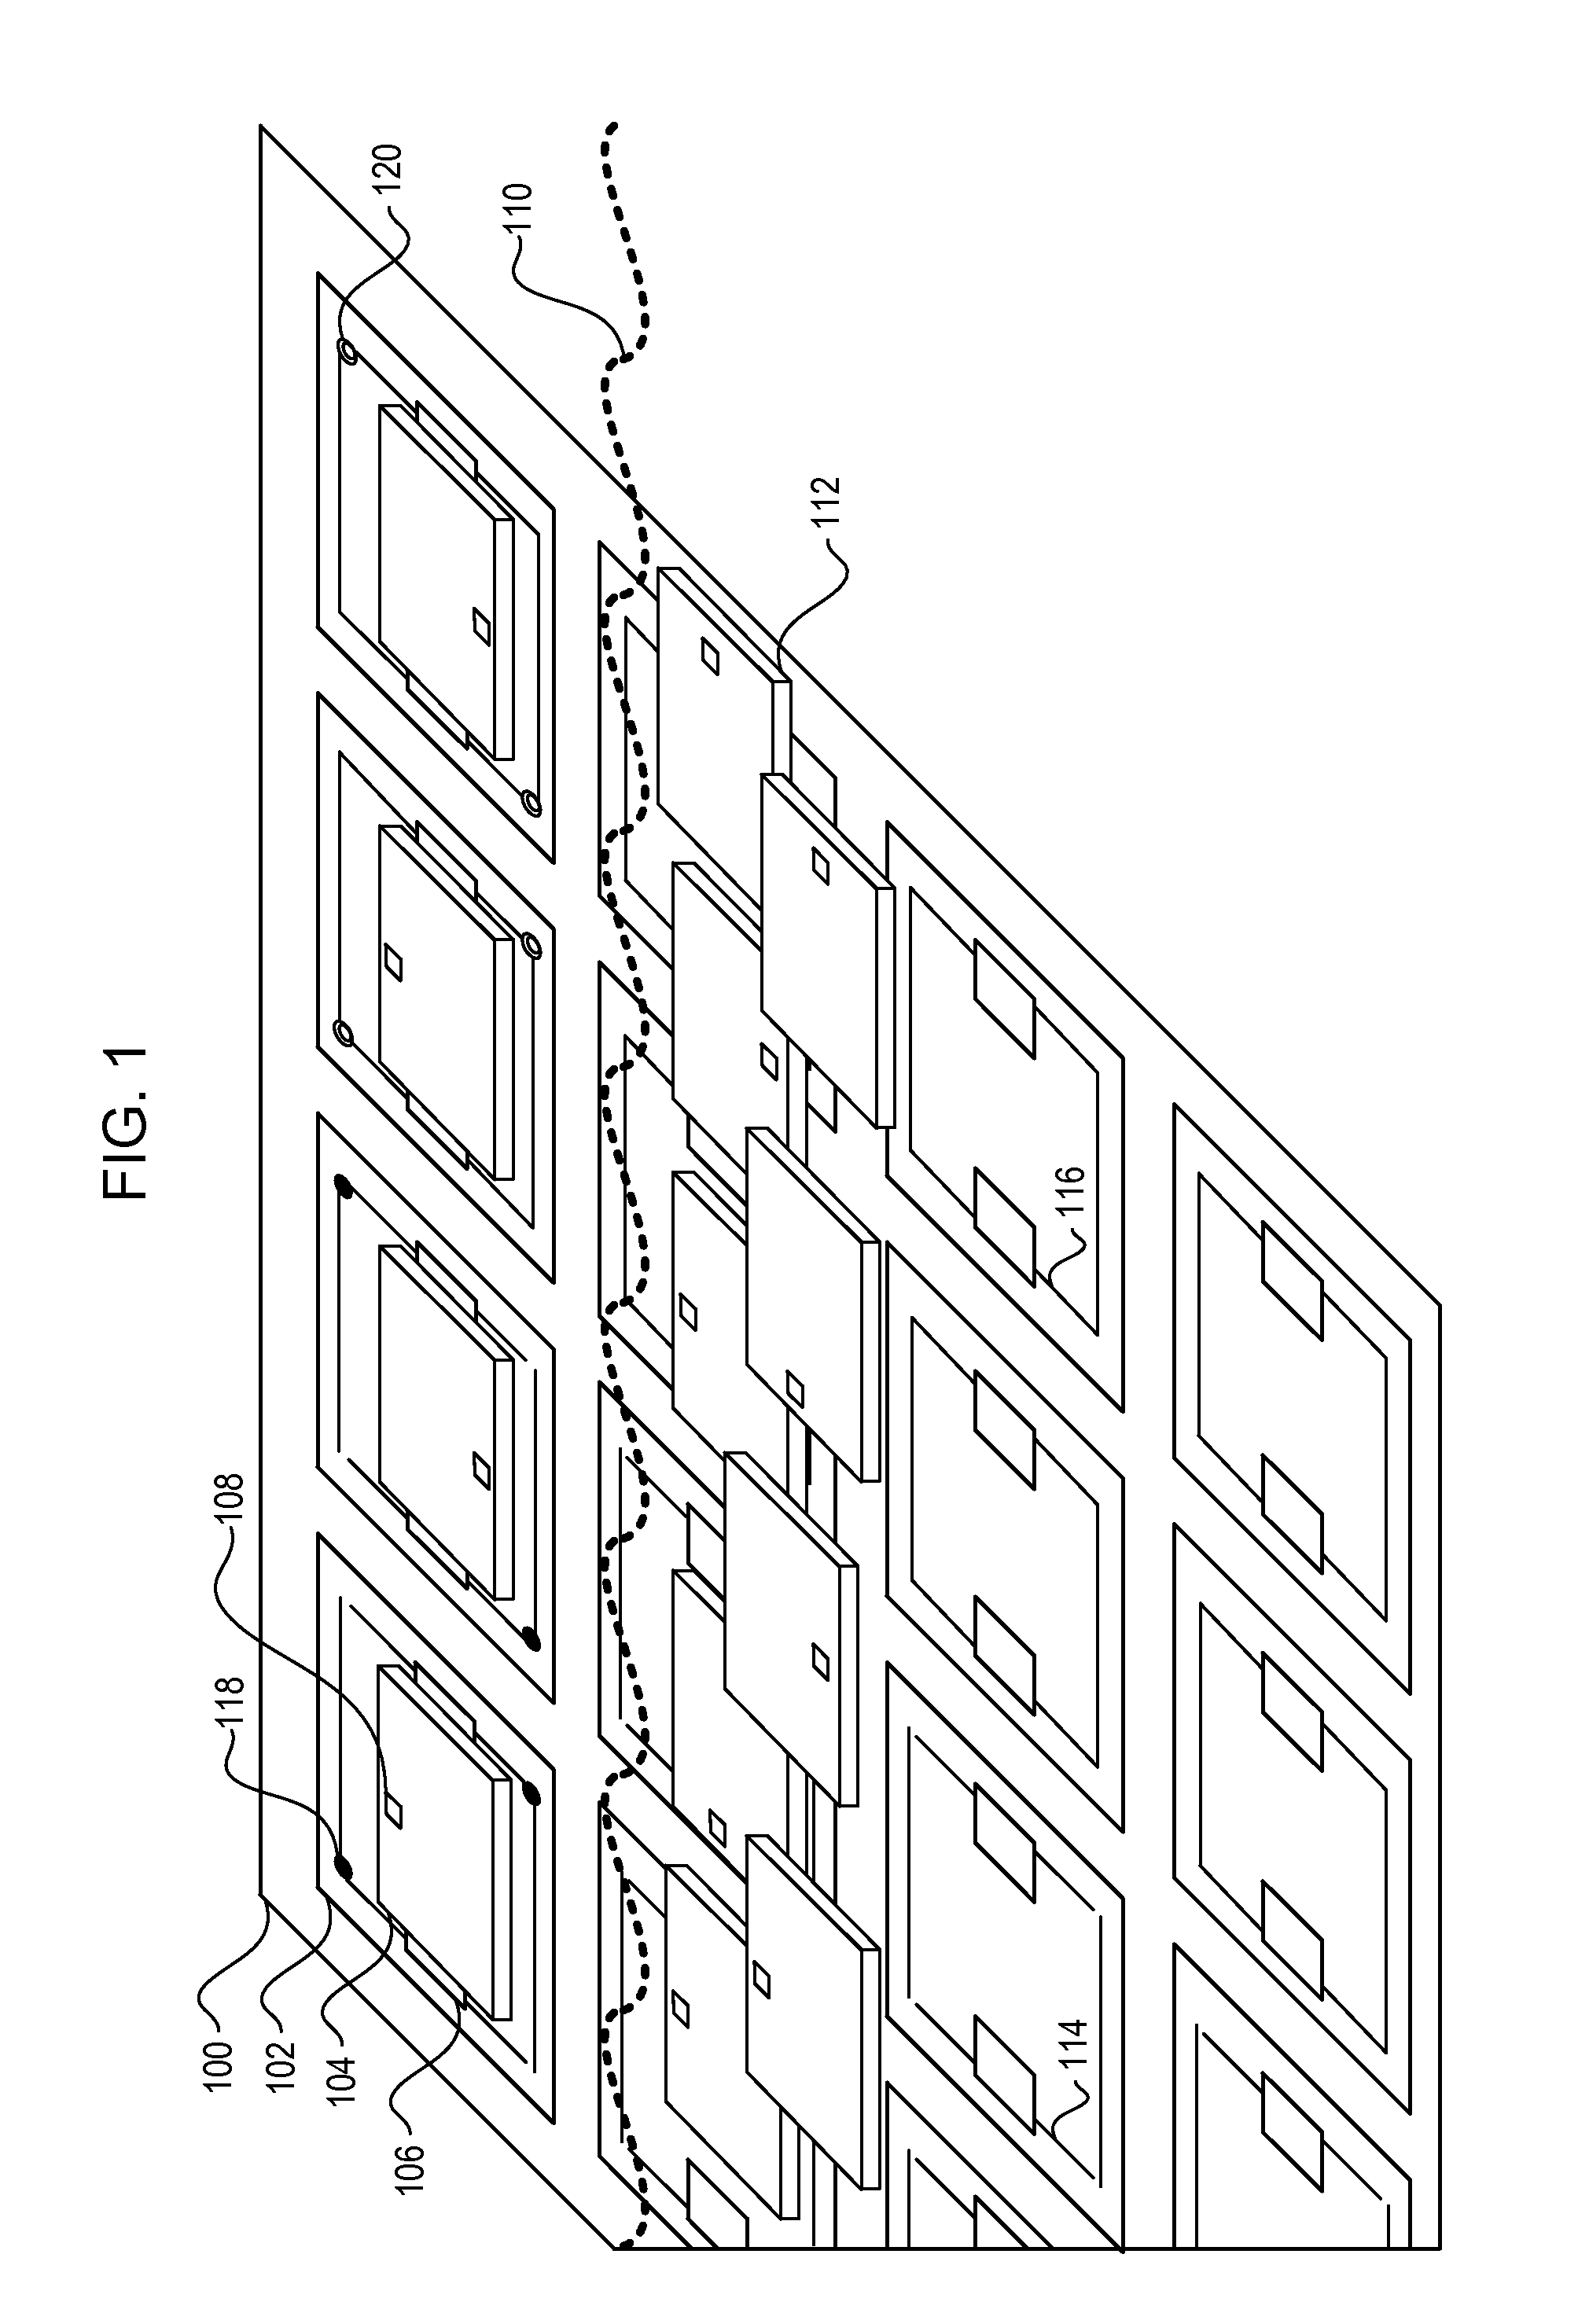 Circuitry configurable based on device orientation